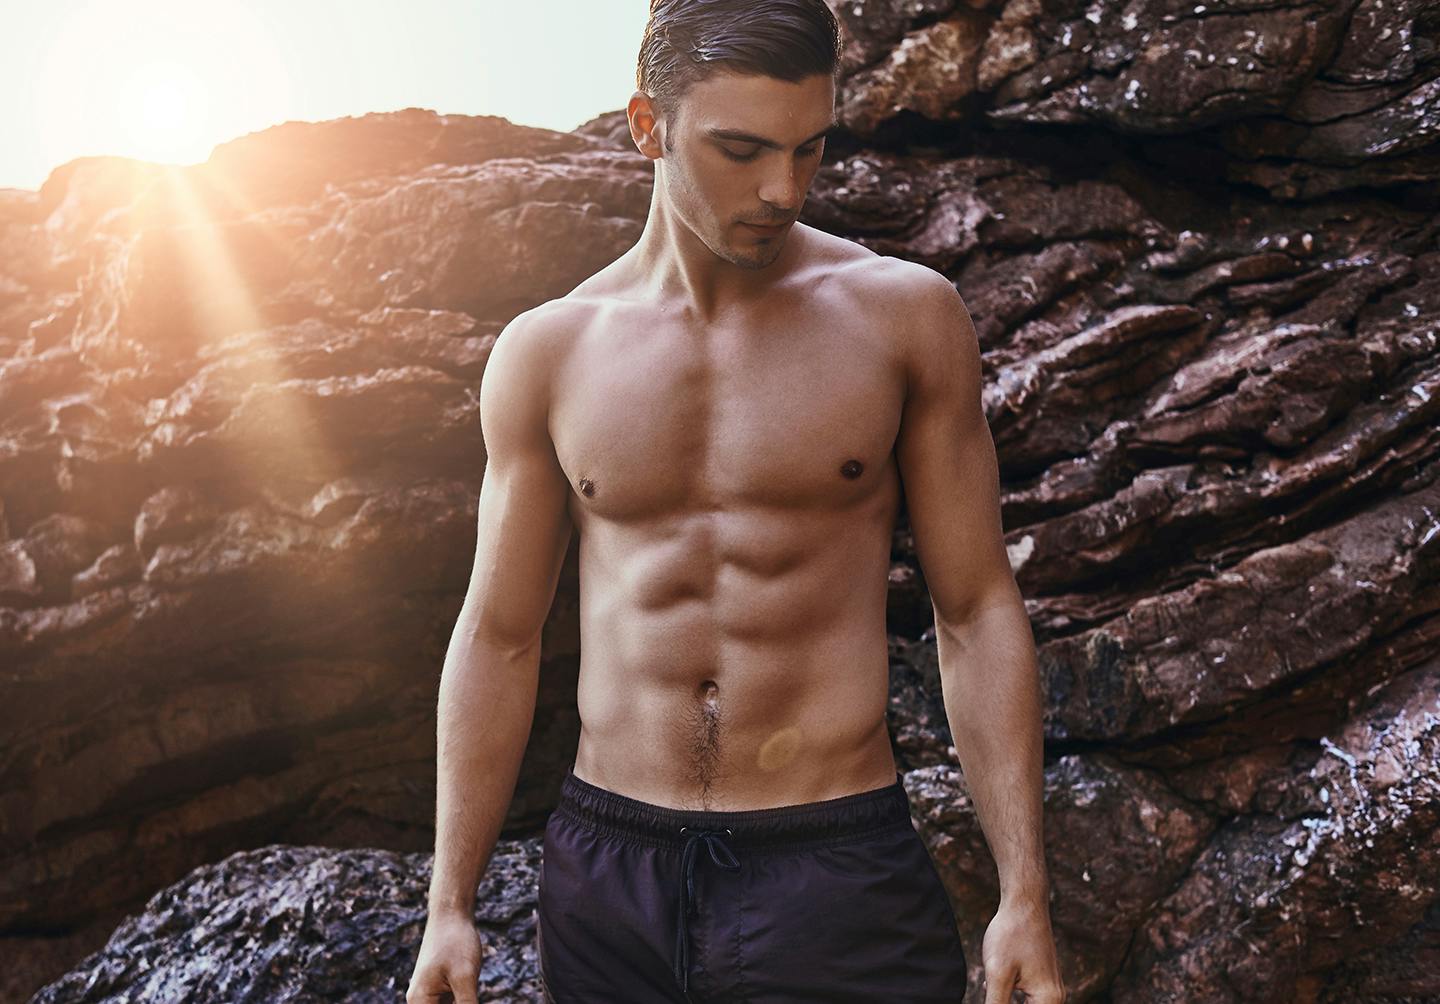 a man shirtless standing in front of larger rocks